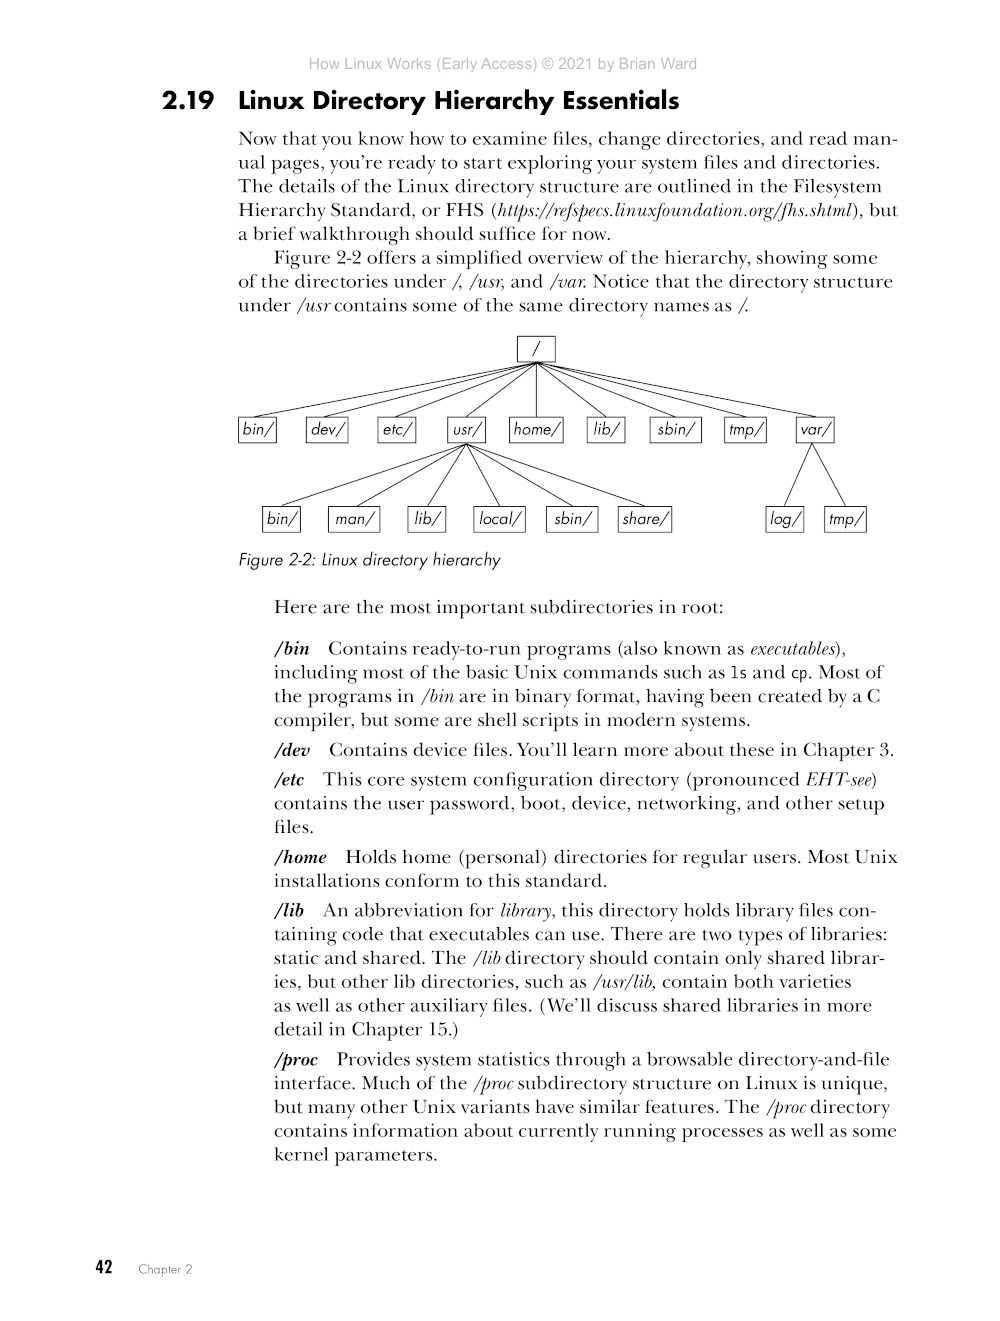 How Linux Works 3rd Edition Page 42